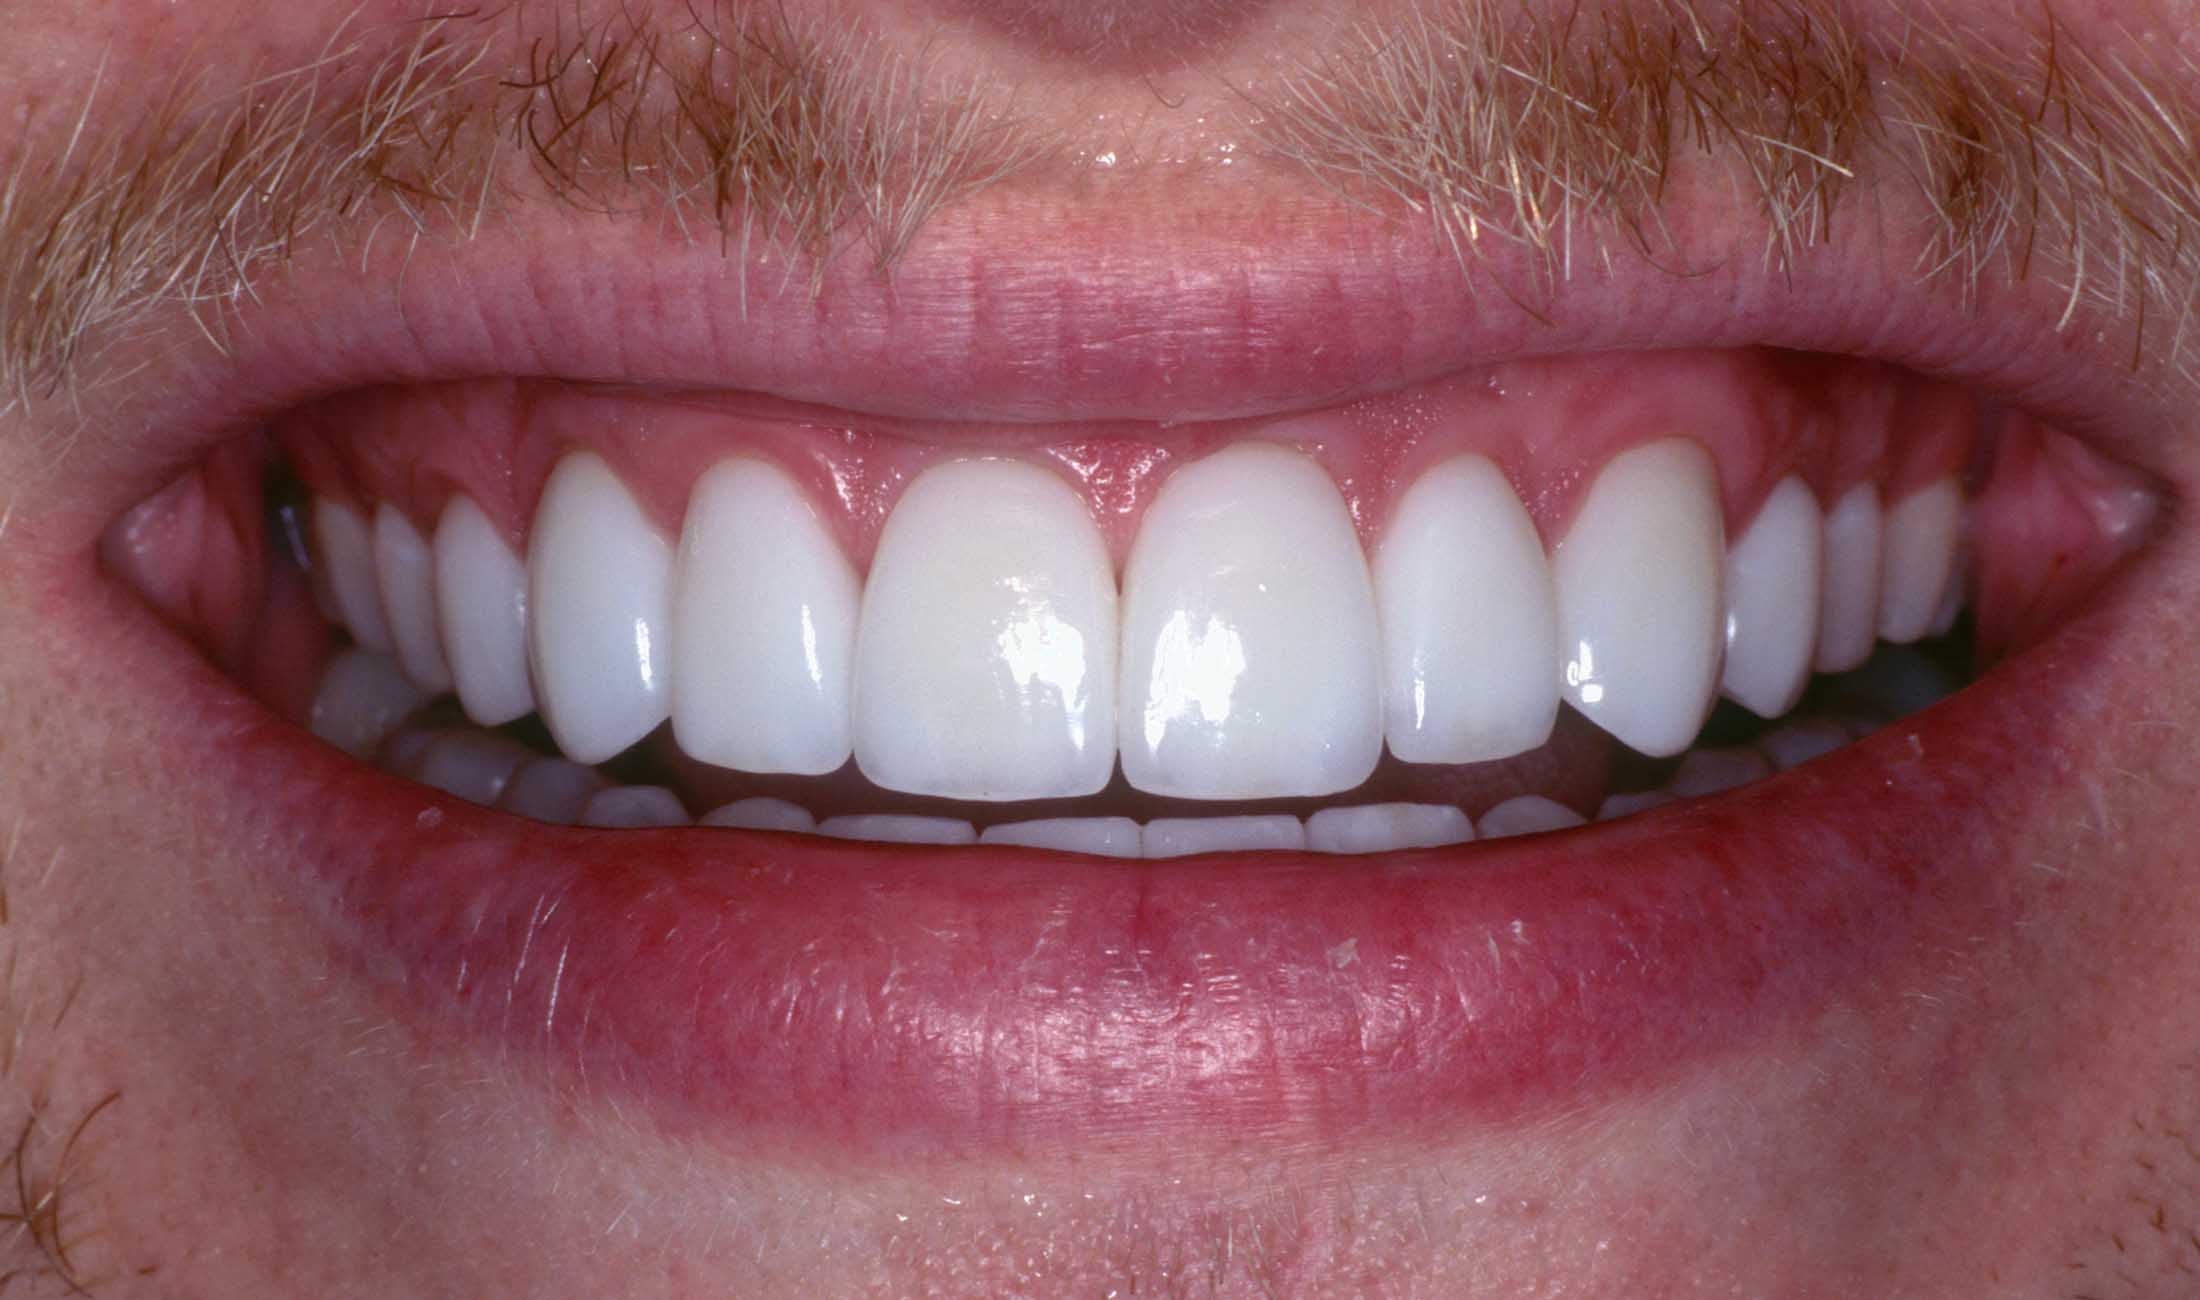 Jason's Close-up Smile After Veneers